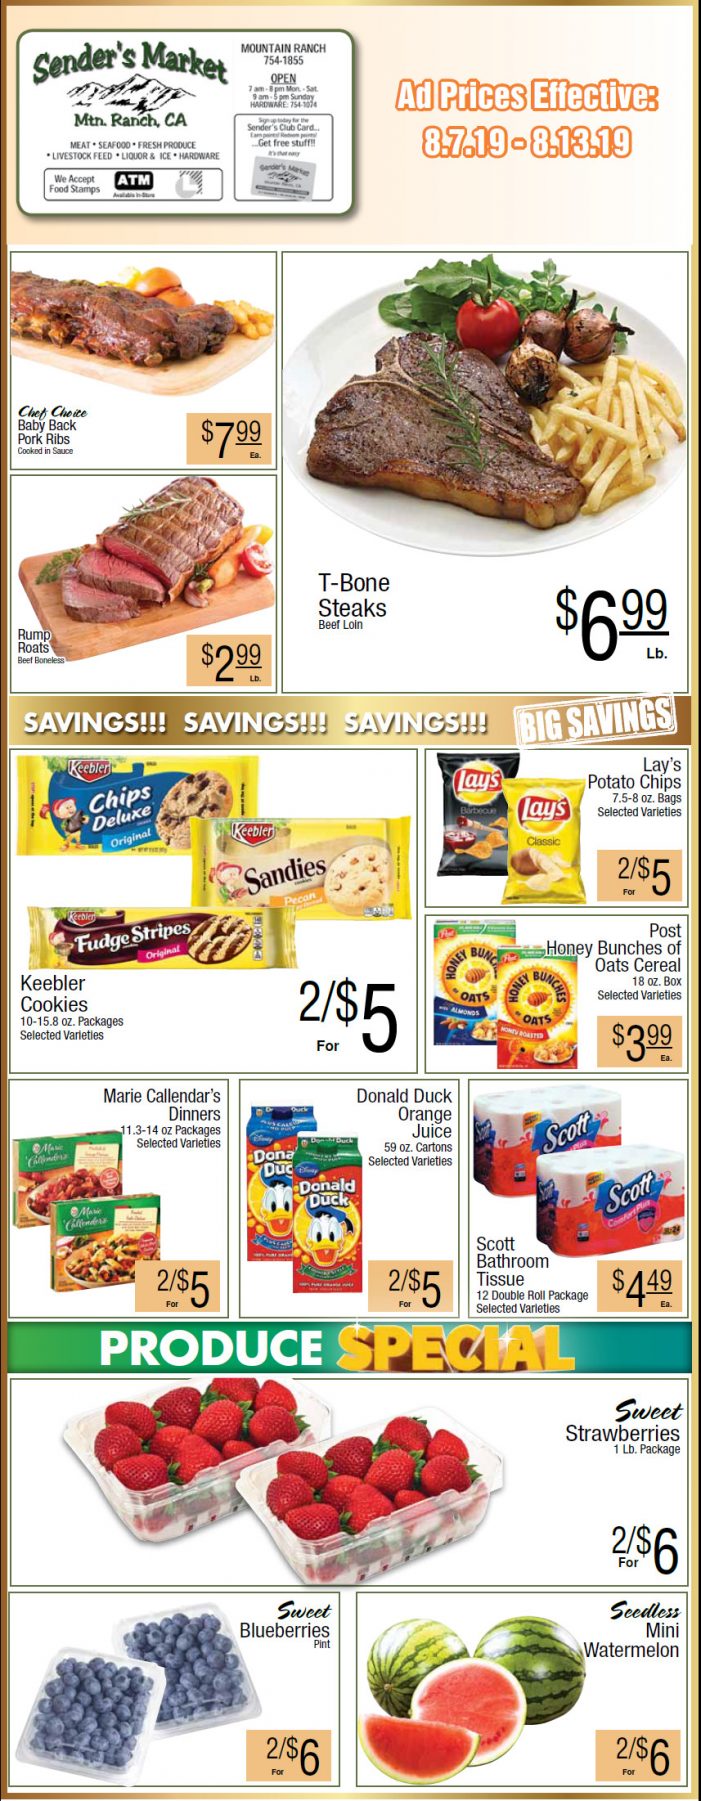 Sender’s Market Weekly Ad & Grocery Specials Through August 13